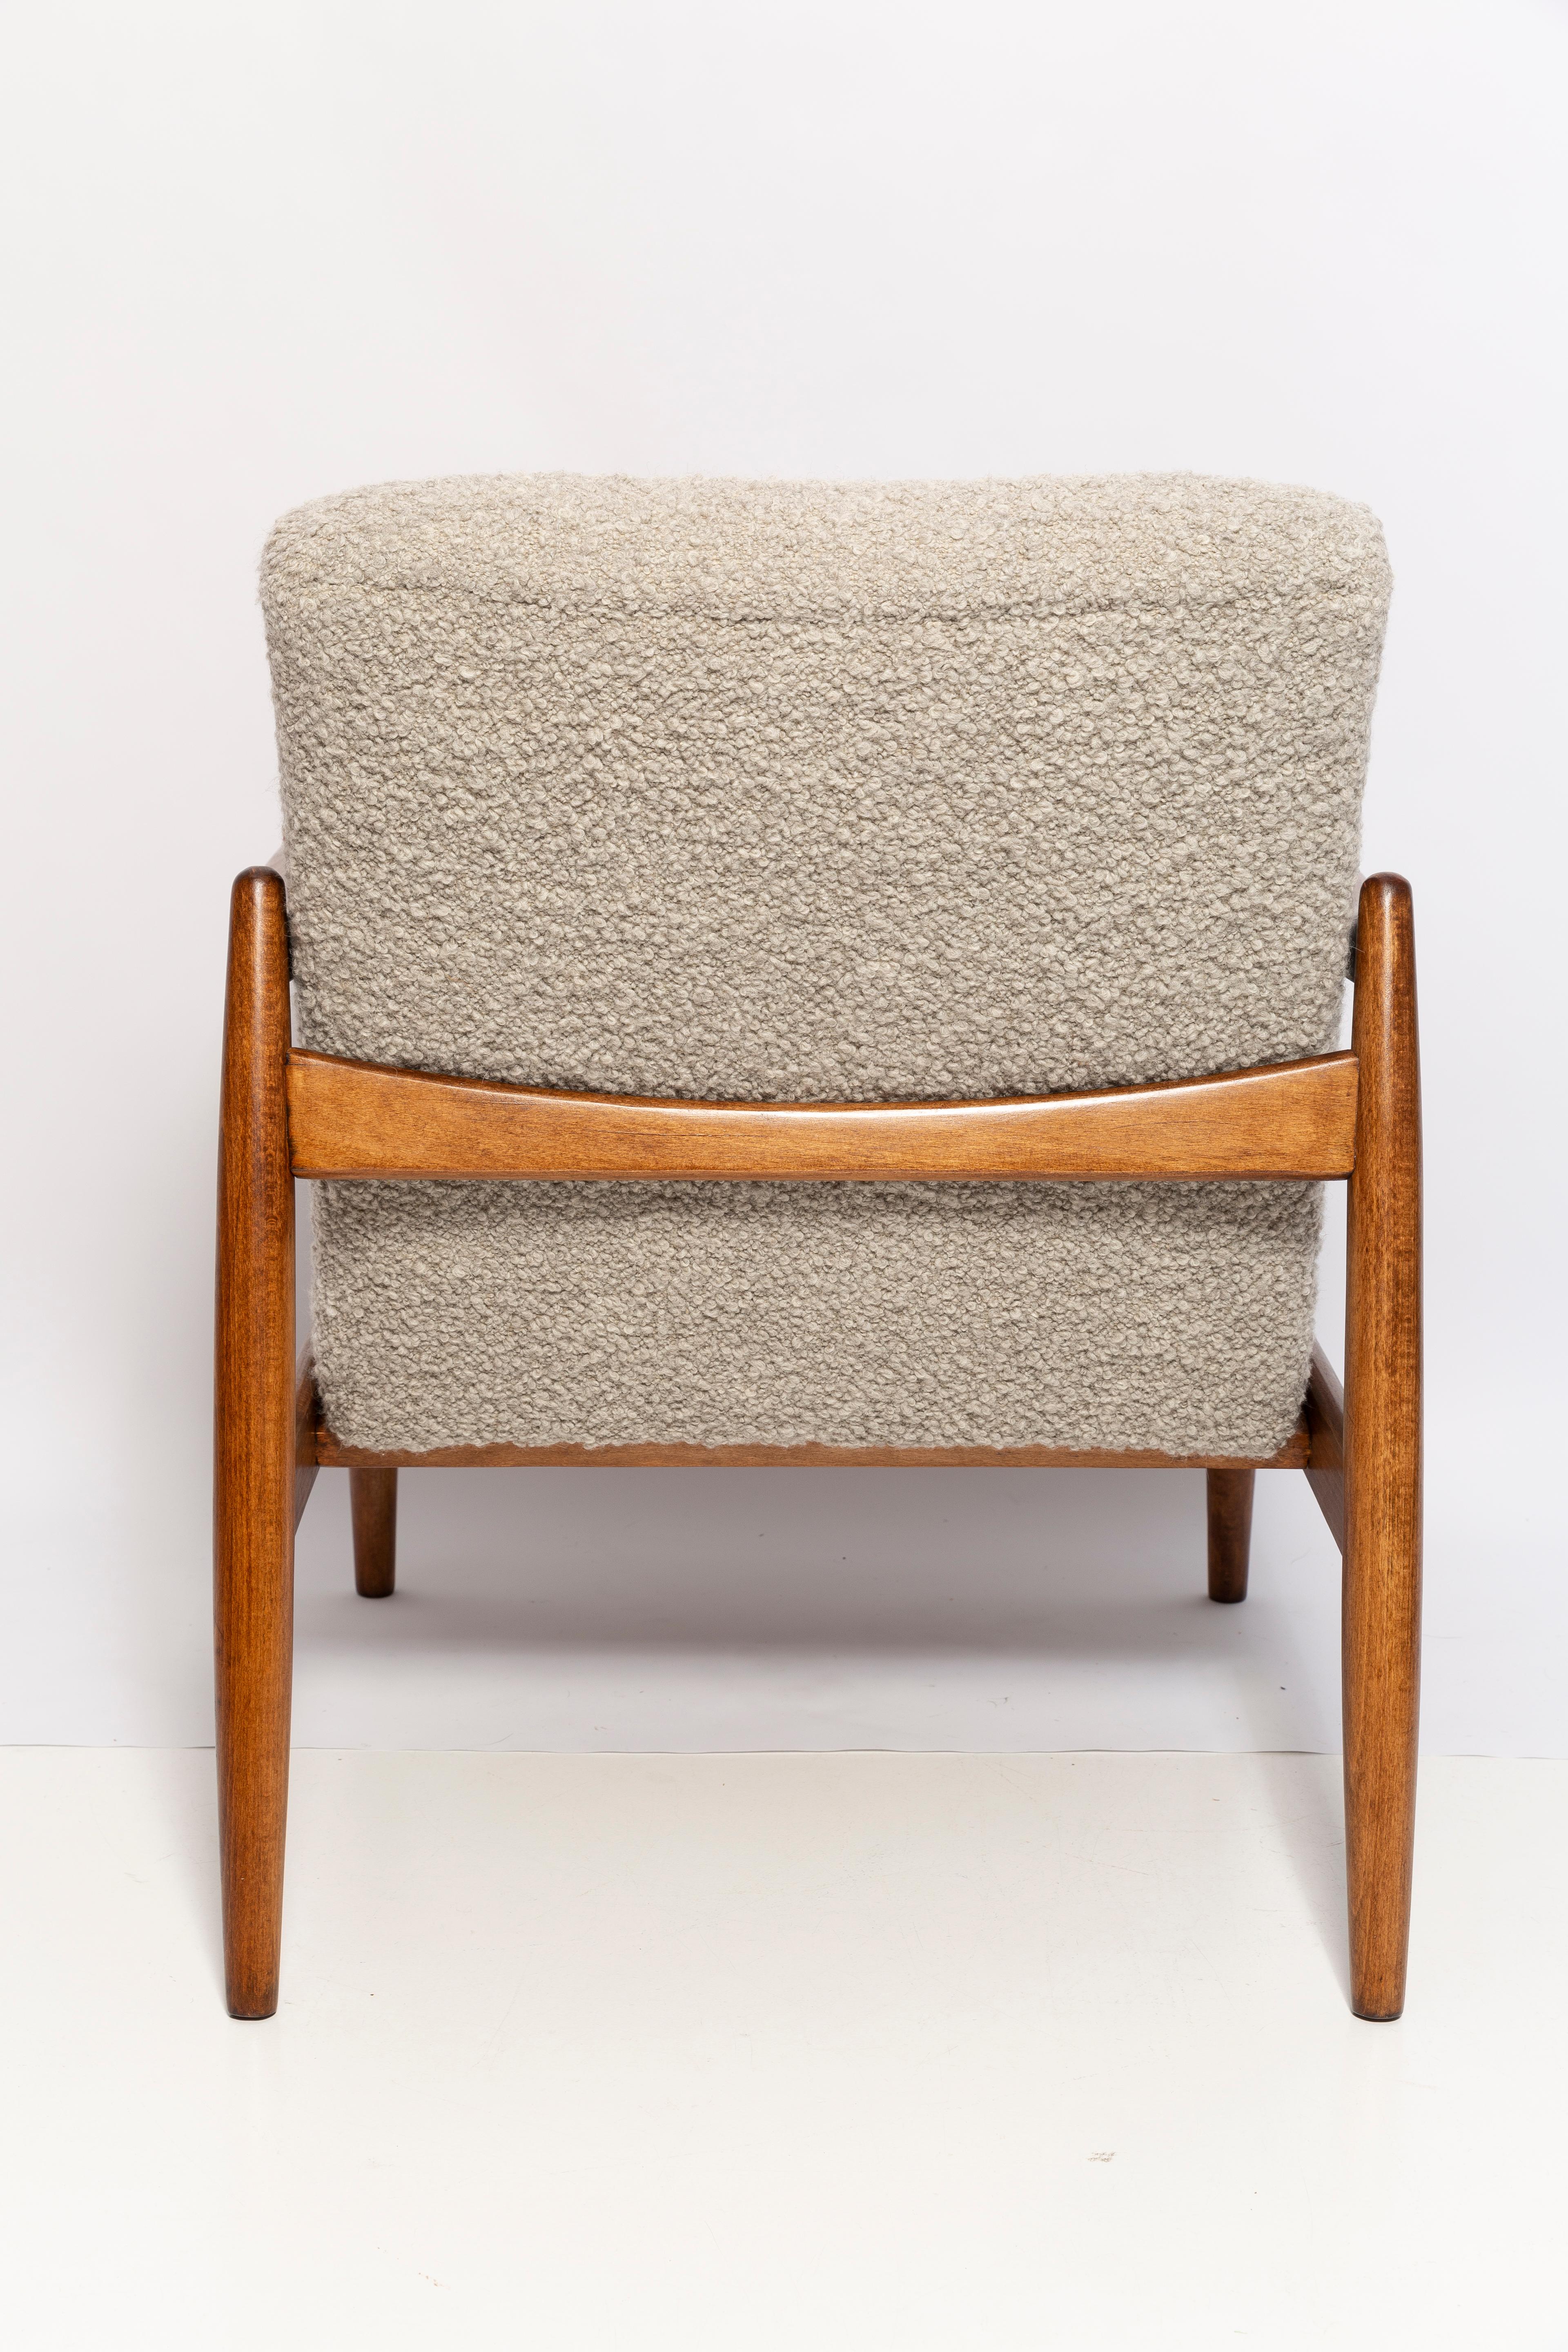 20th Century Midcentury Gray Alpaca Wool Armchairs and Stools, Edmund Homa, Poland, 1960s For Sale